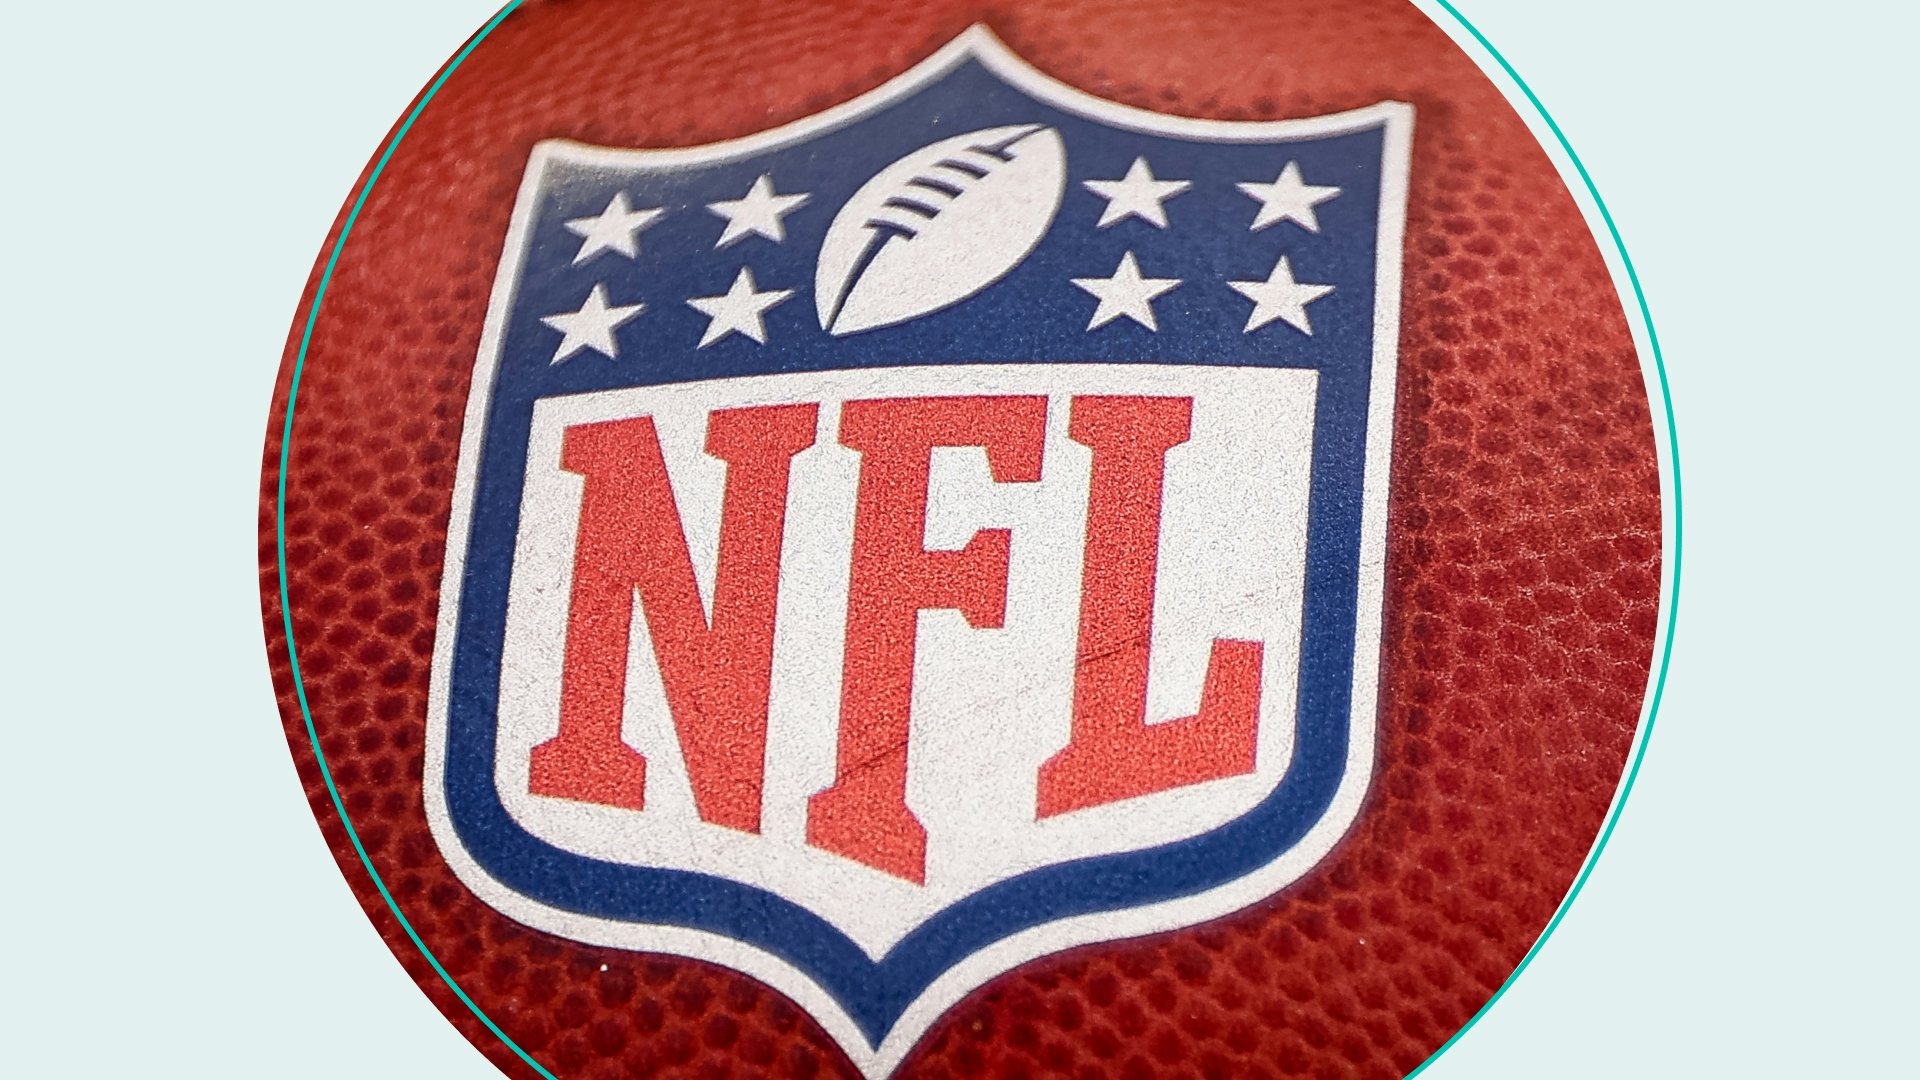 A general view of the NFL logo on a football before the game between the Washington Commanders and the Philadelphia Eagles at FedExField on September 25, 2022